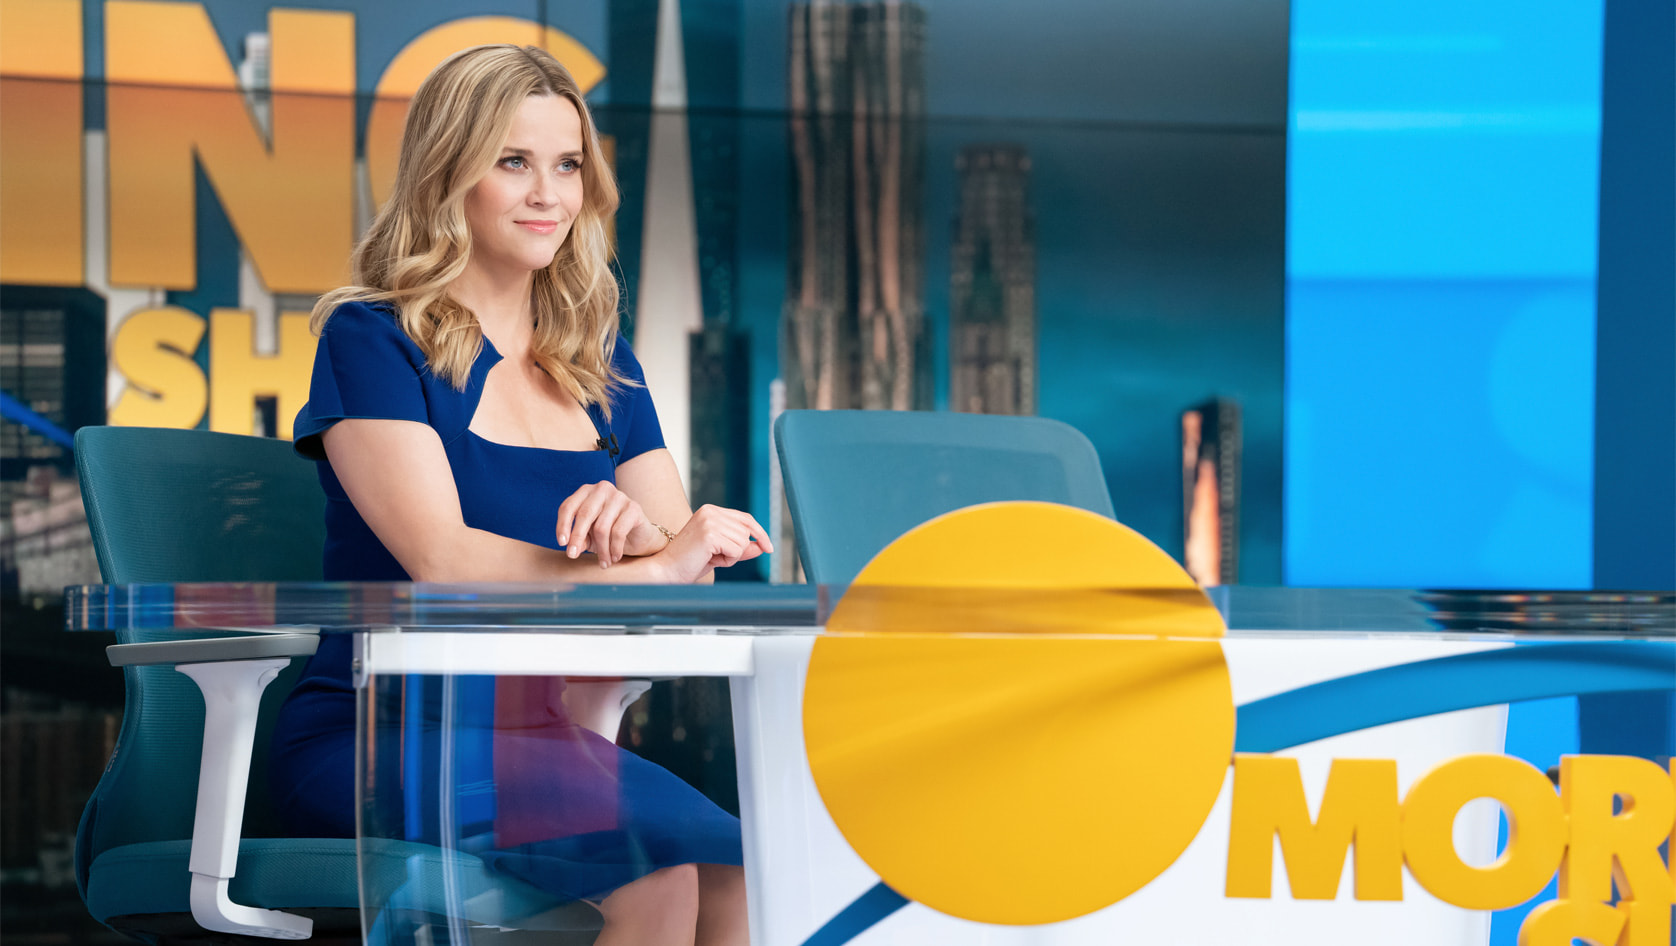 Here’s why The Morning Show decided to set its second season on the cusp of COVID